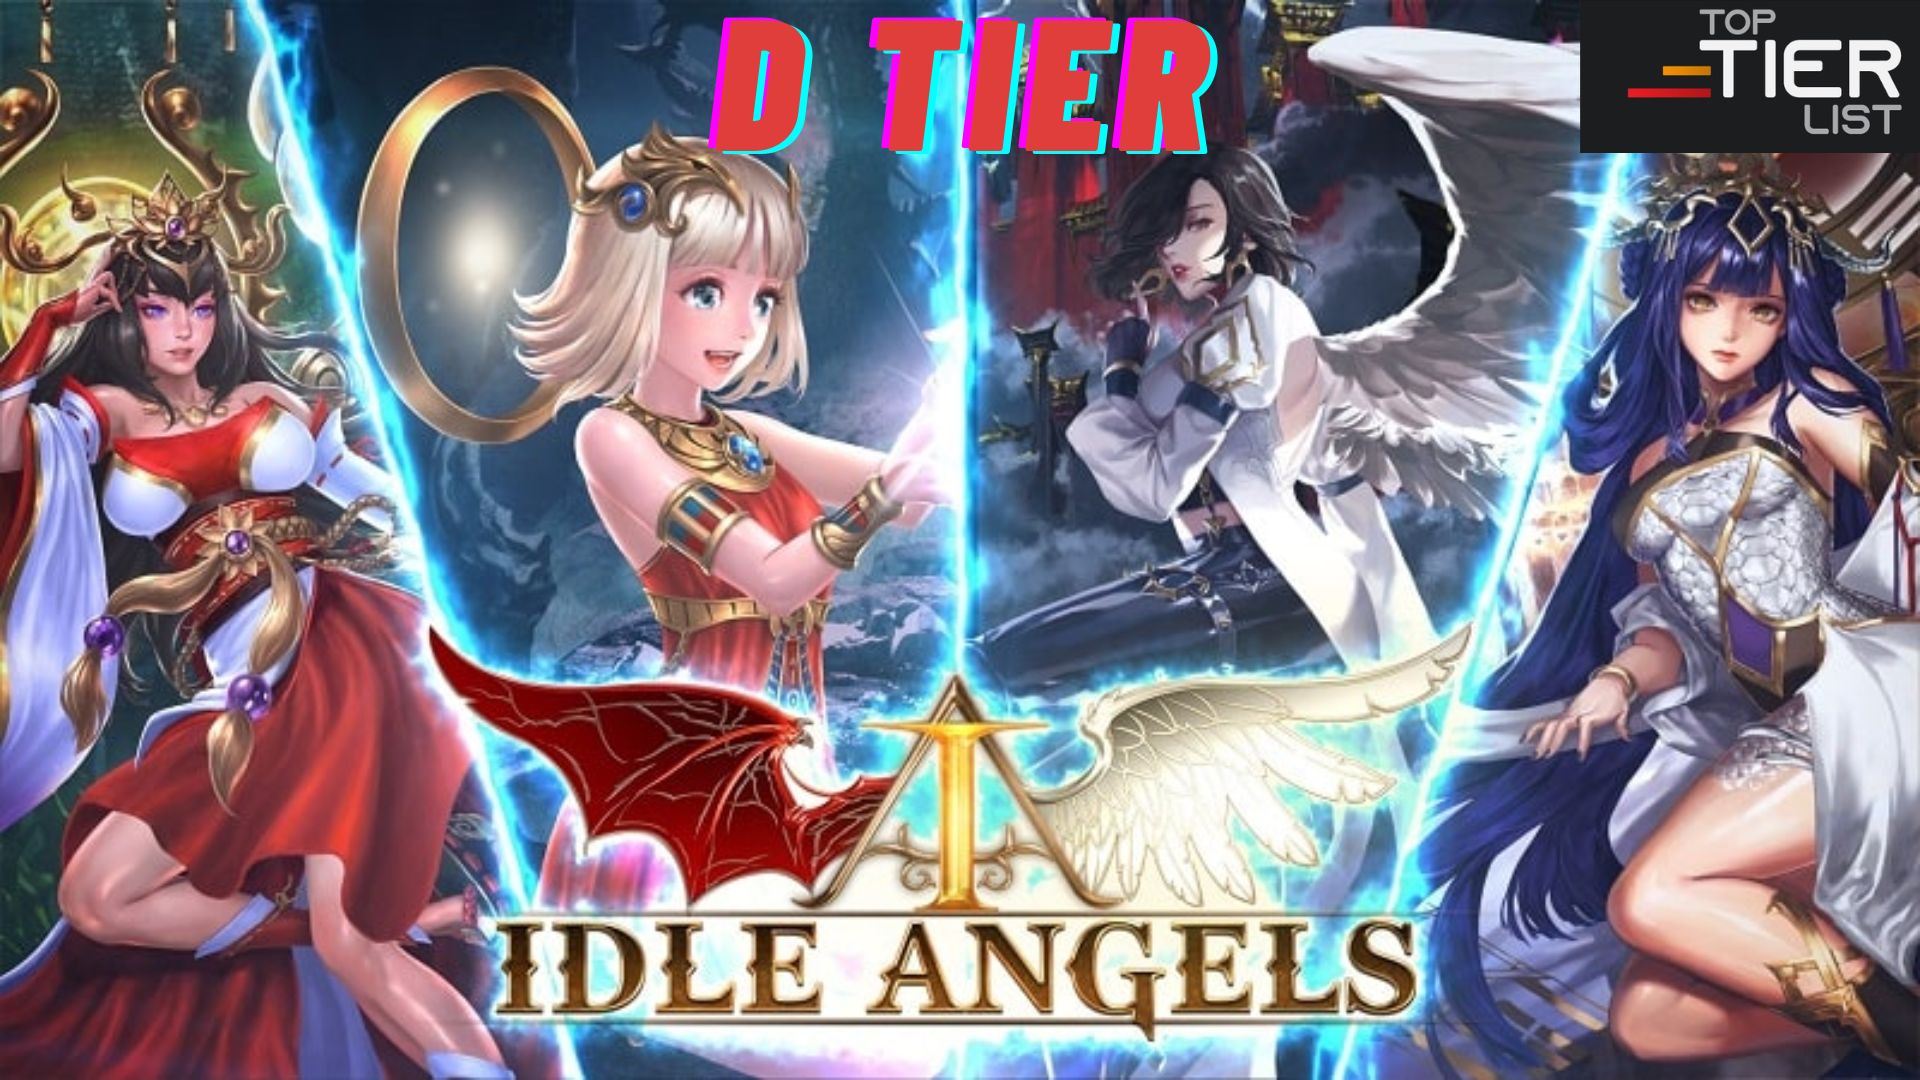 Idle angels all characters